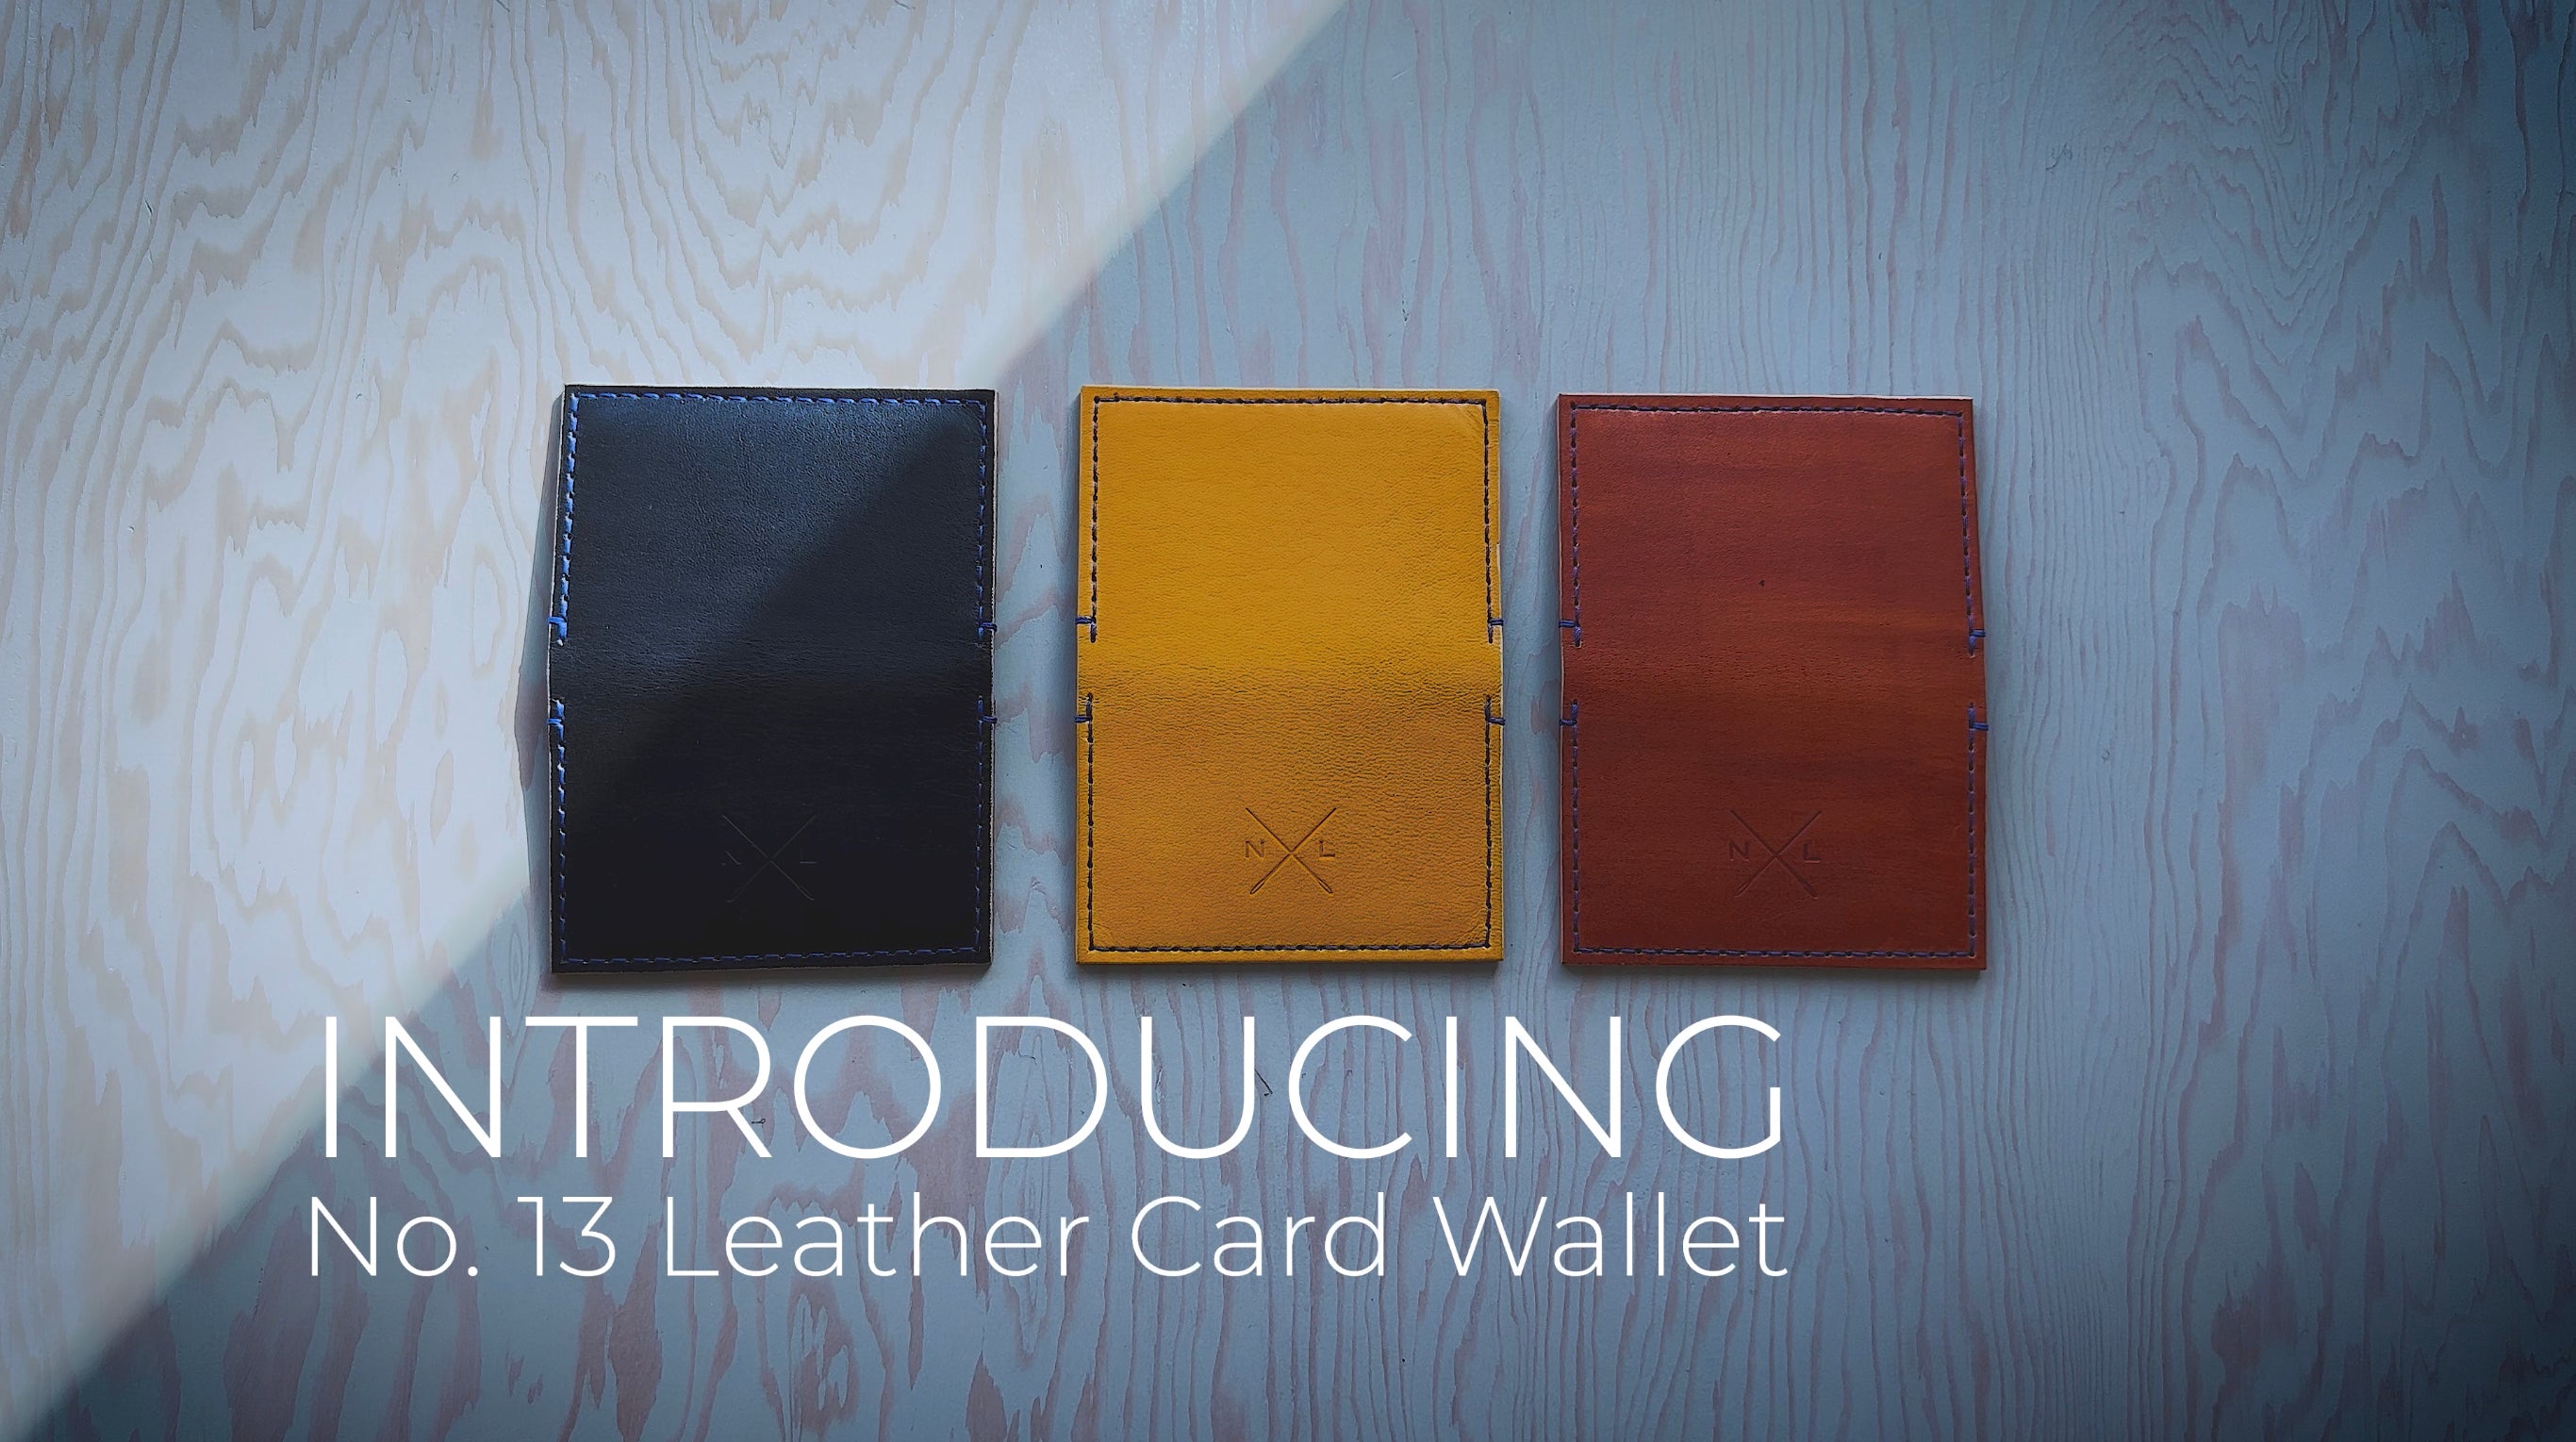 Load video: Introducing our No.13 Leather Wallet